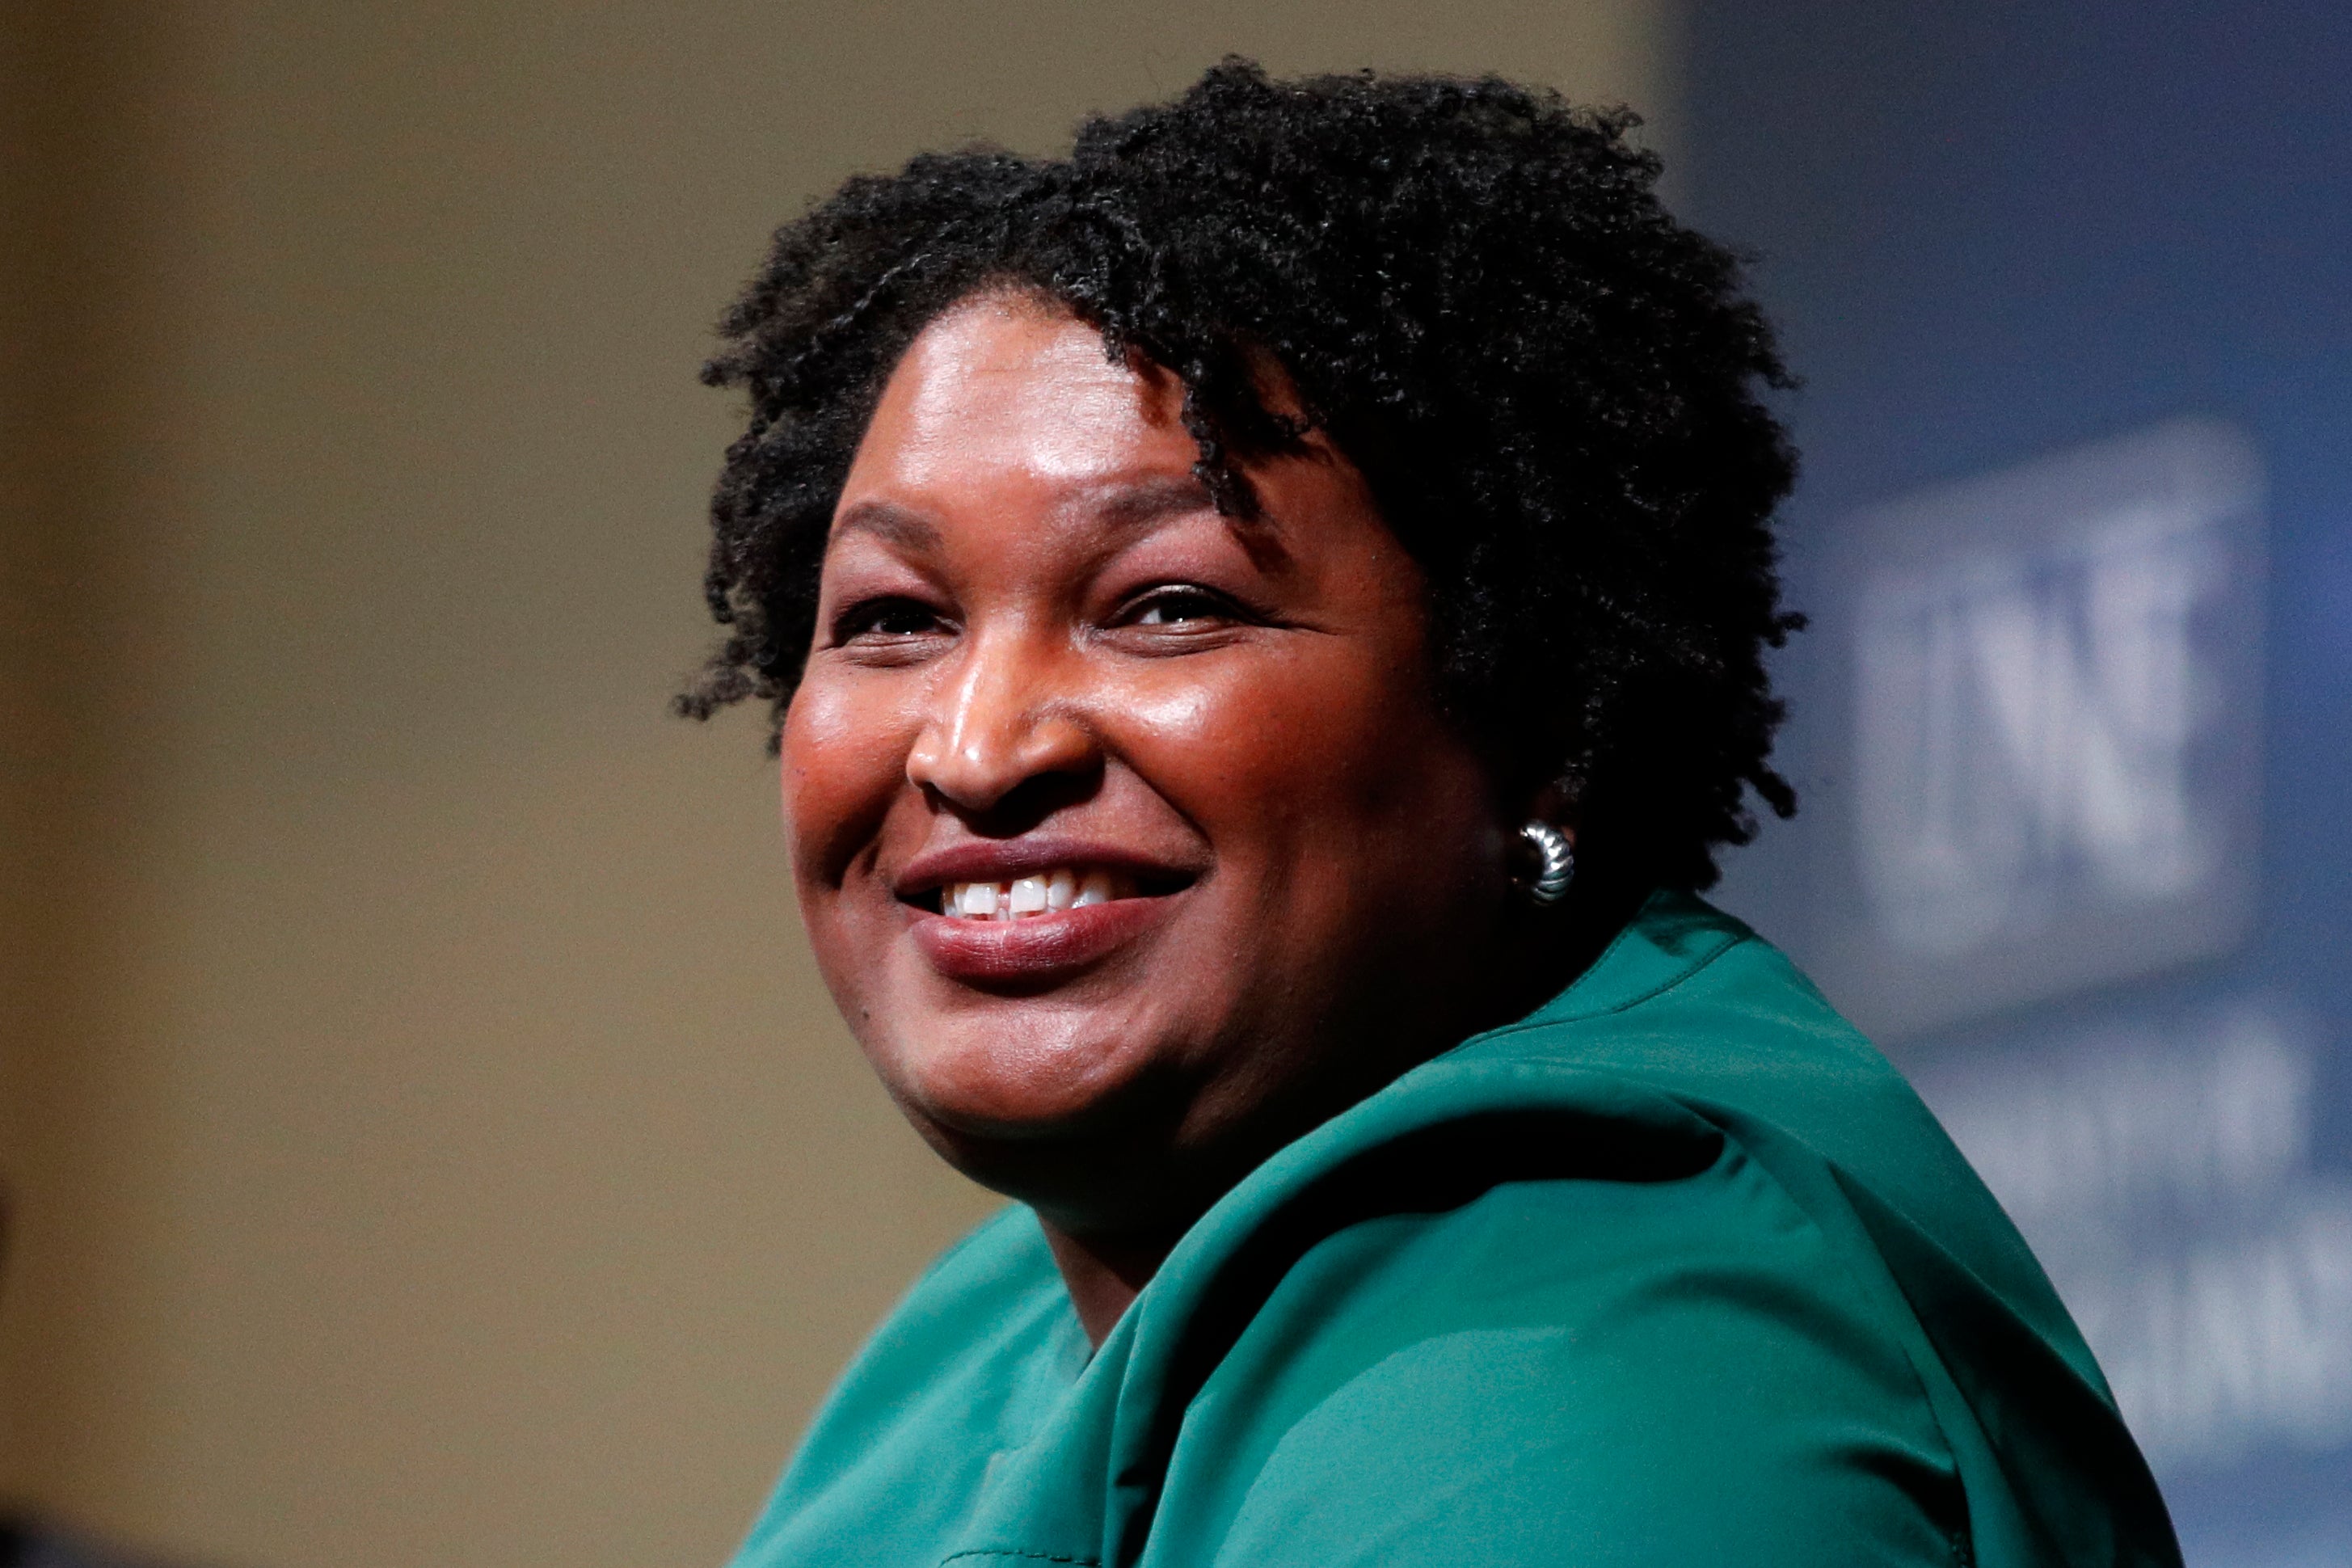 Stacey Abrams speaks at the University of New England in Portland, Maine on 22 January, 2020.